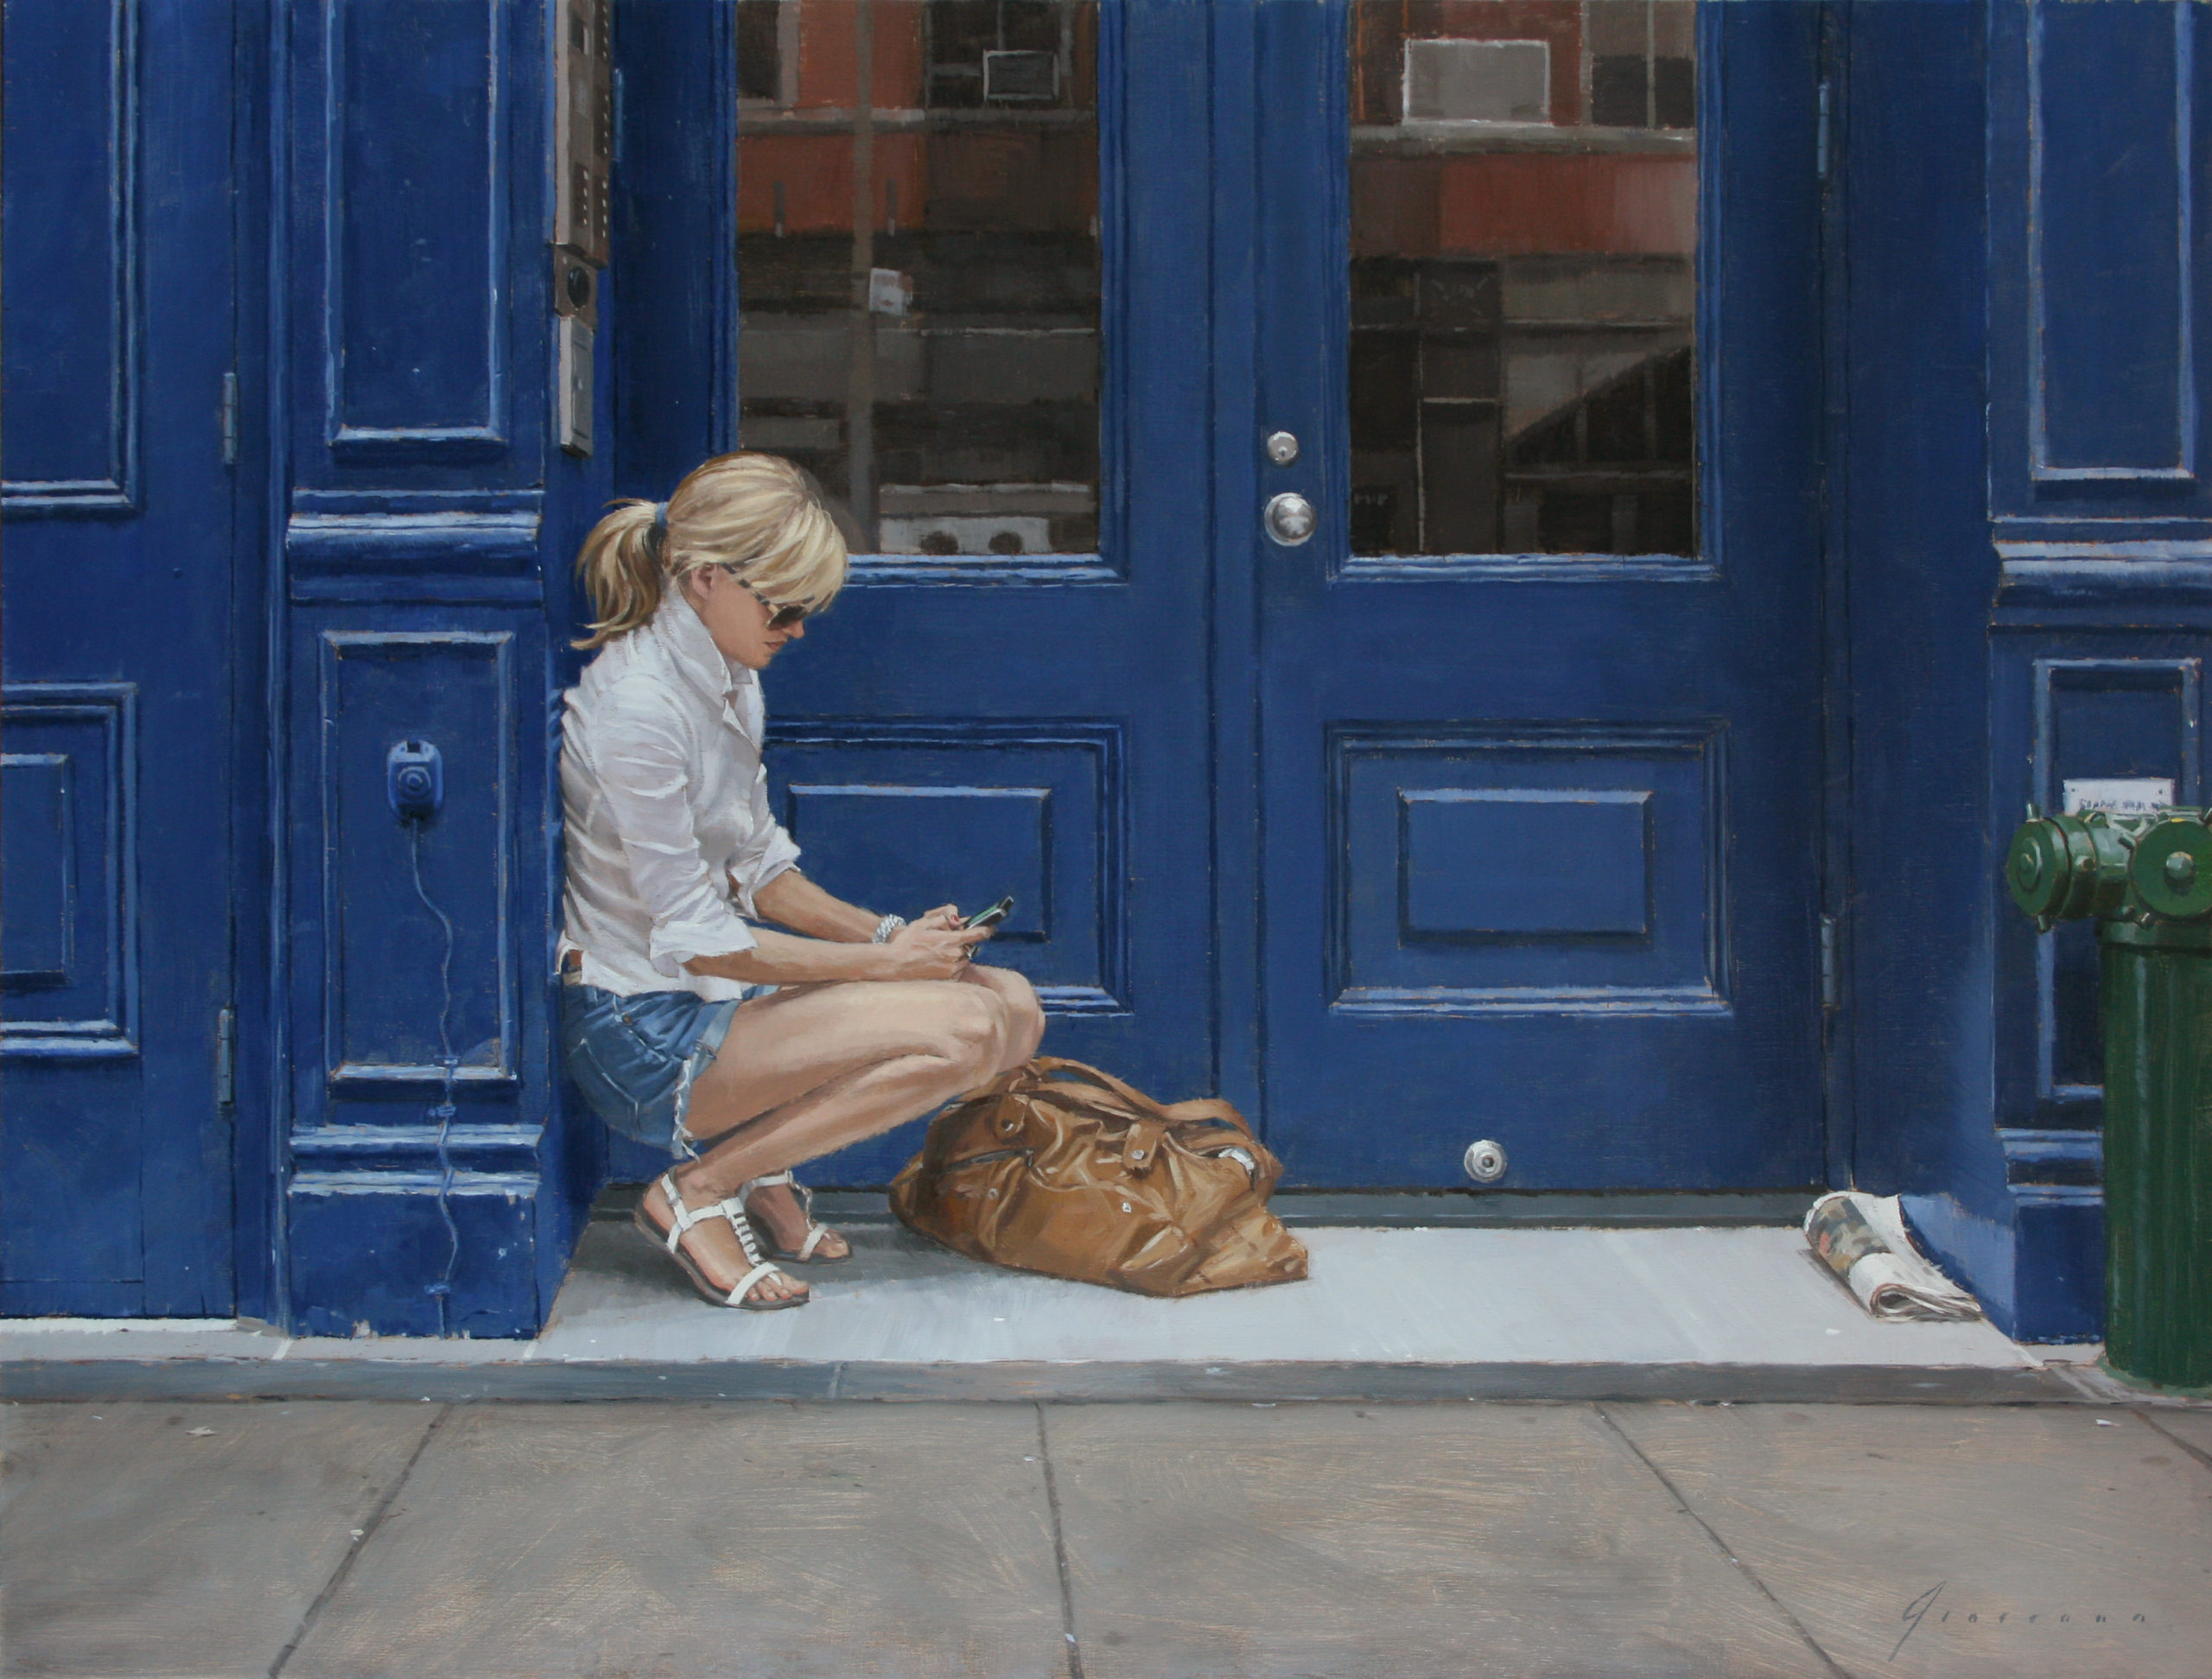 Painting people in New York City - Vincent Giarrano, "Communiqué," 18 x 24 inches, Oil on linen